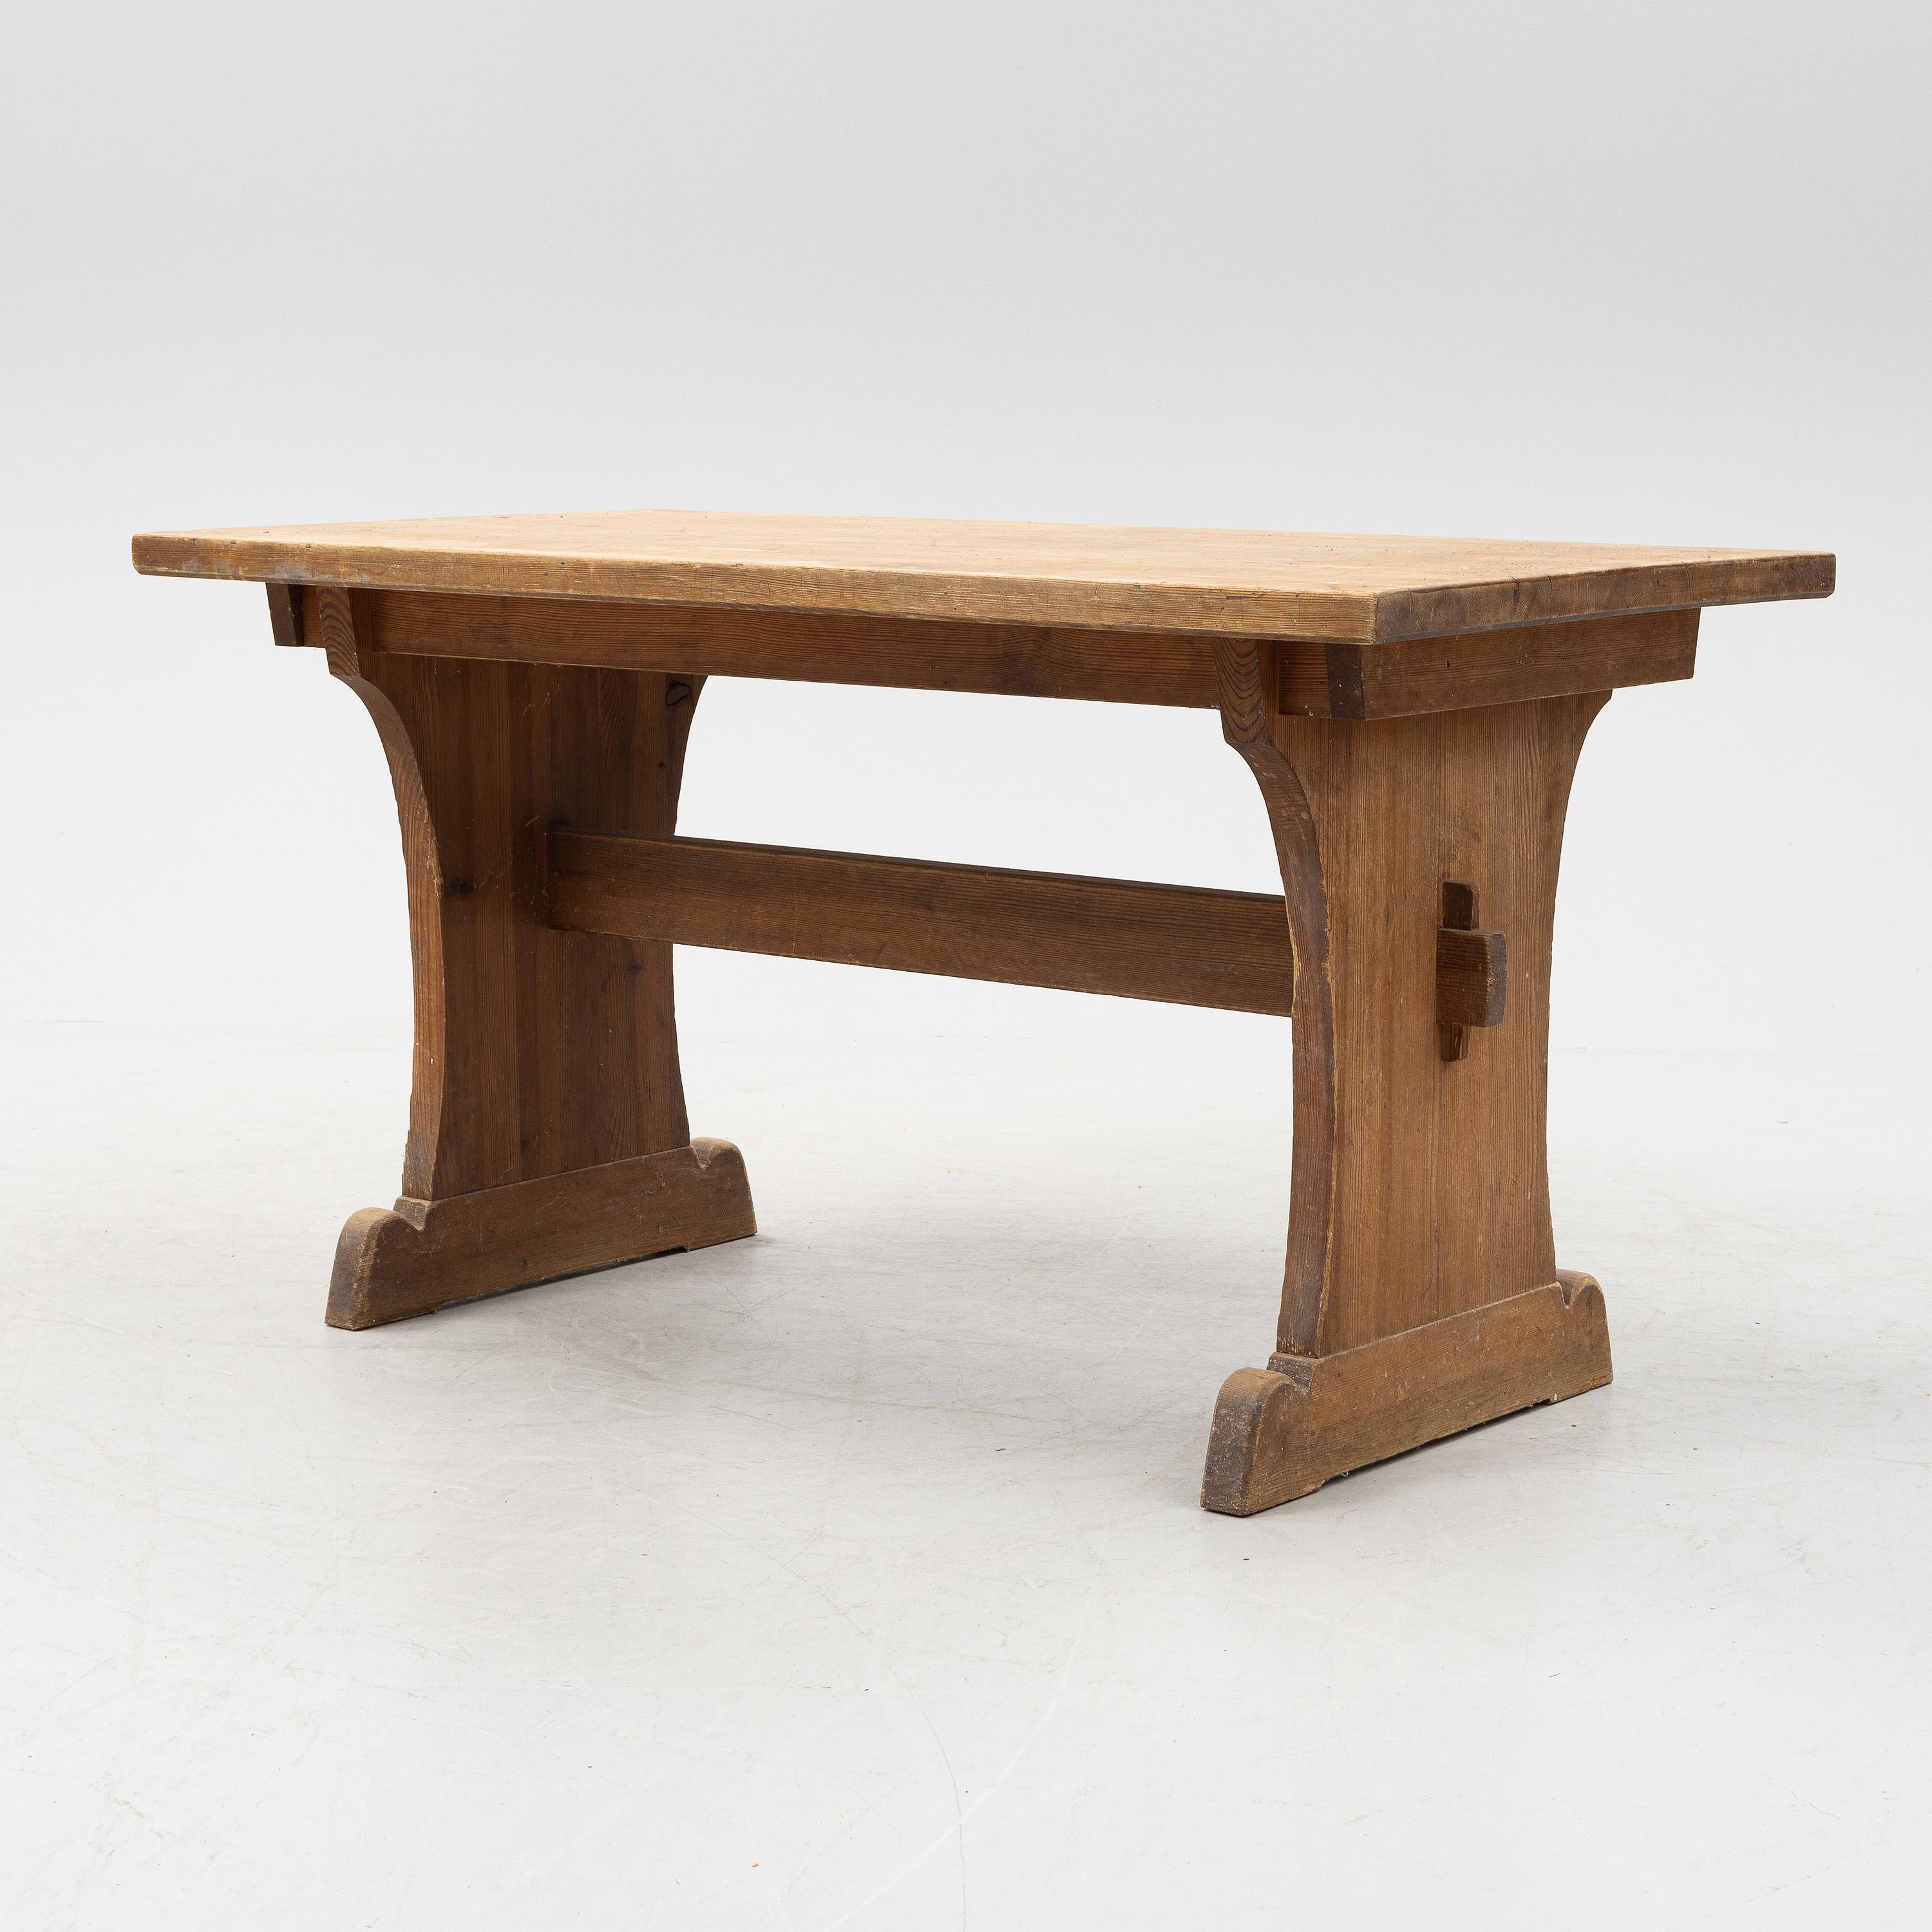 Rare dining / console table in solid stained pine designed by Axel Einar Hjorth and produced for Nordiska Kompaniet in Stockholm during the 1930s. In good vintage and original condition with signs from age and use. 

Dimensions: H: 74 cm W: 140 cm